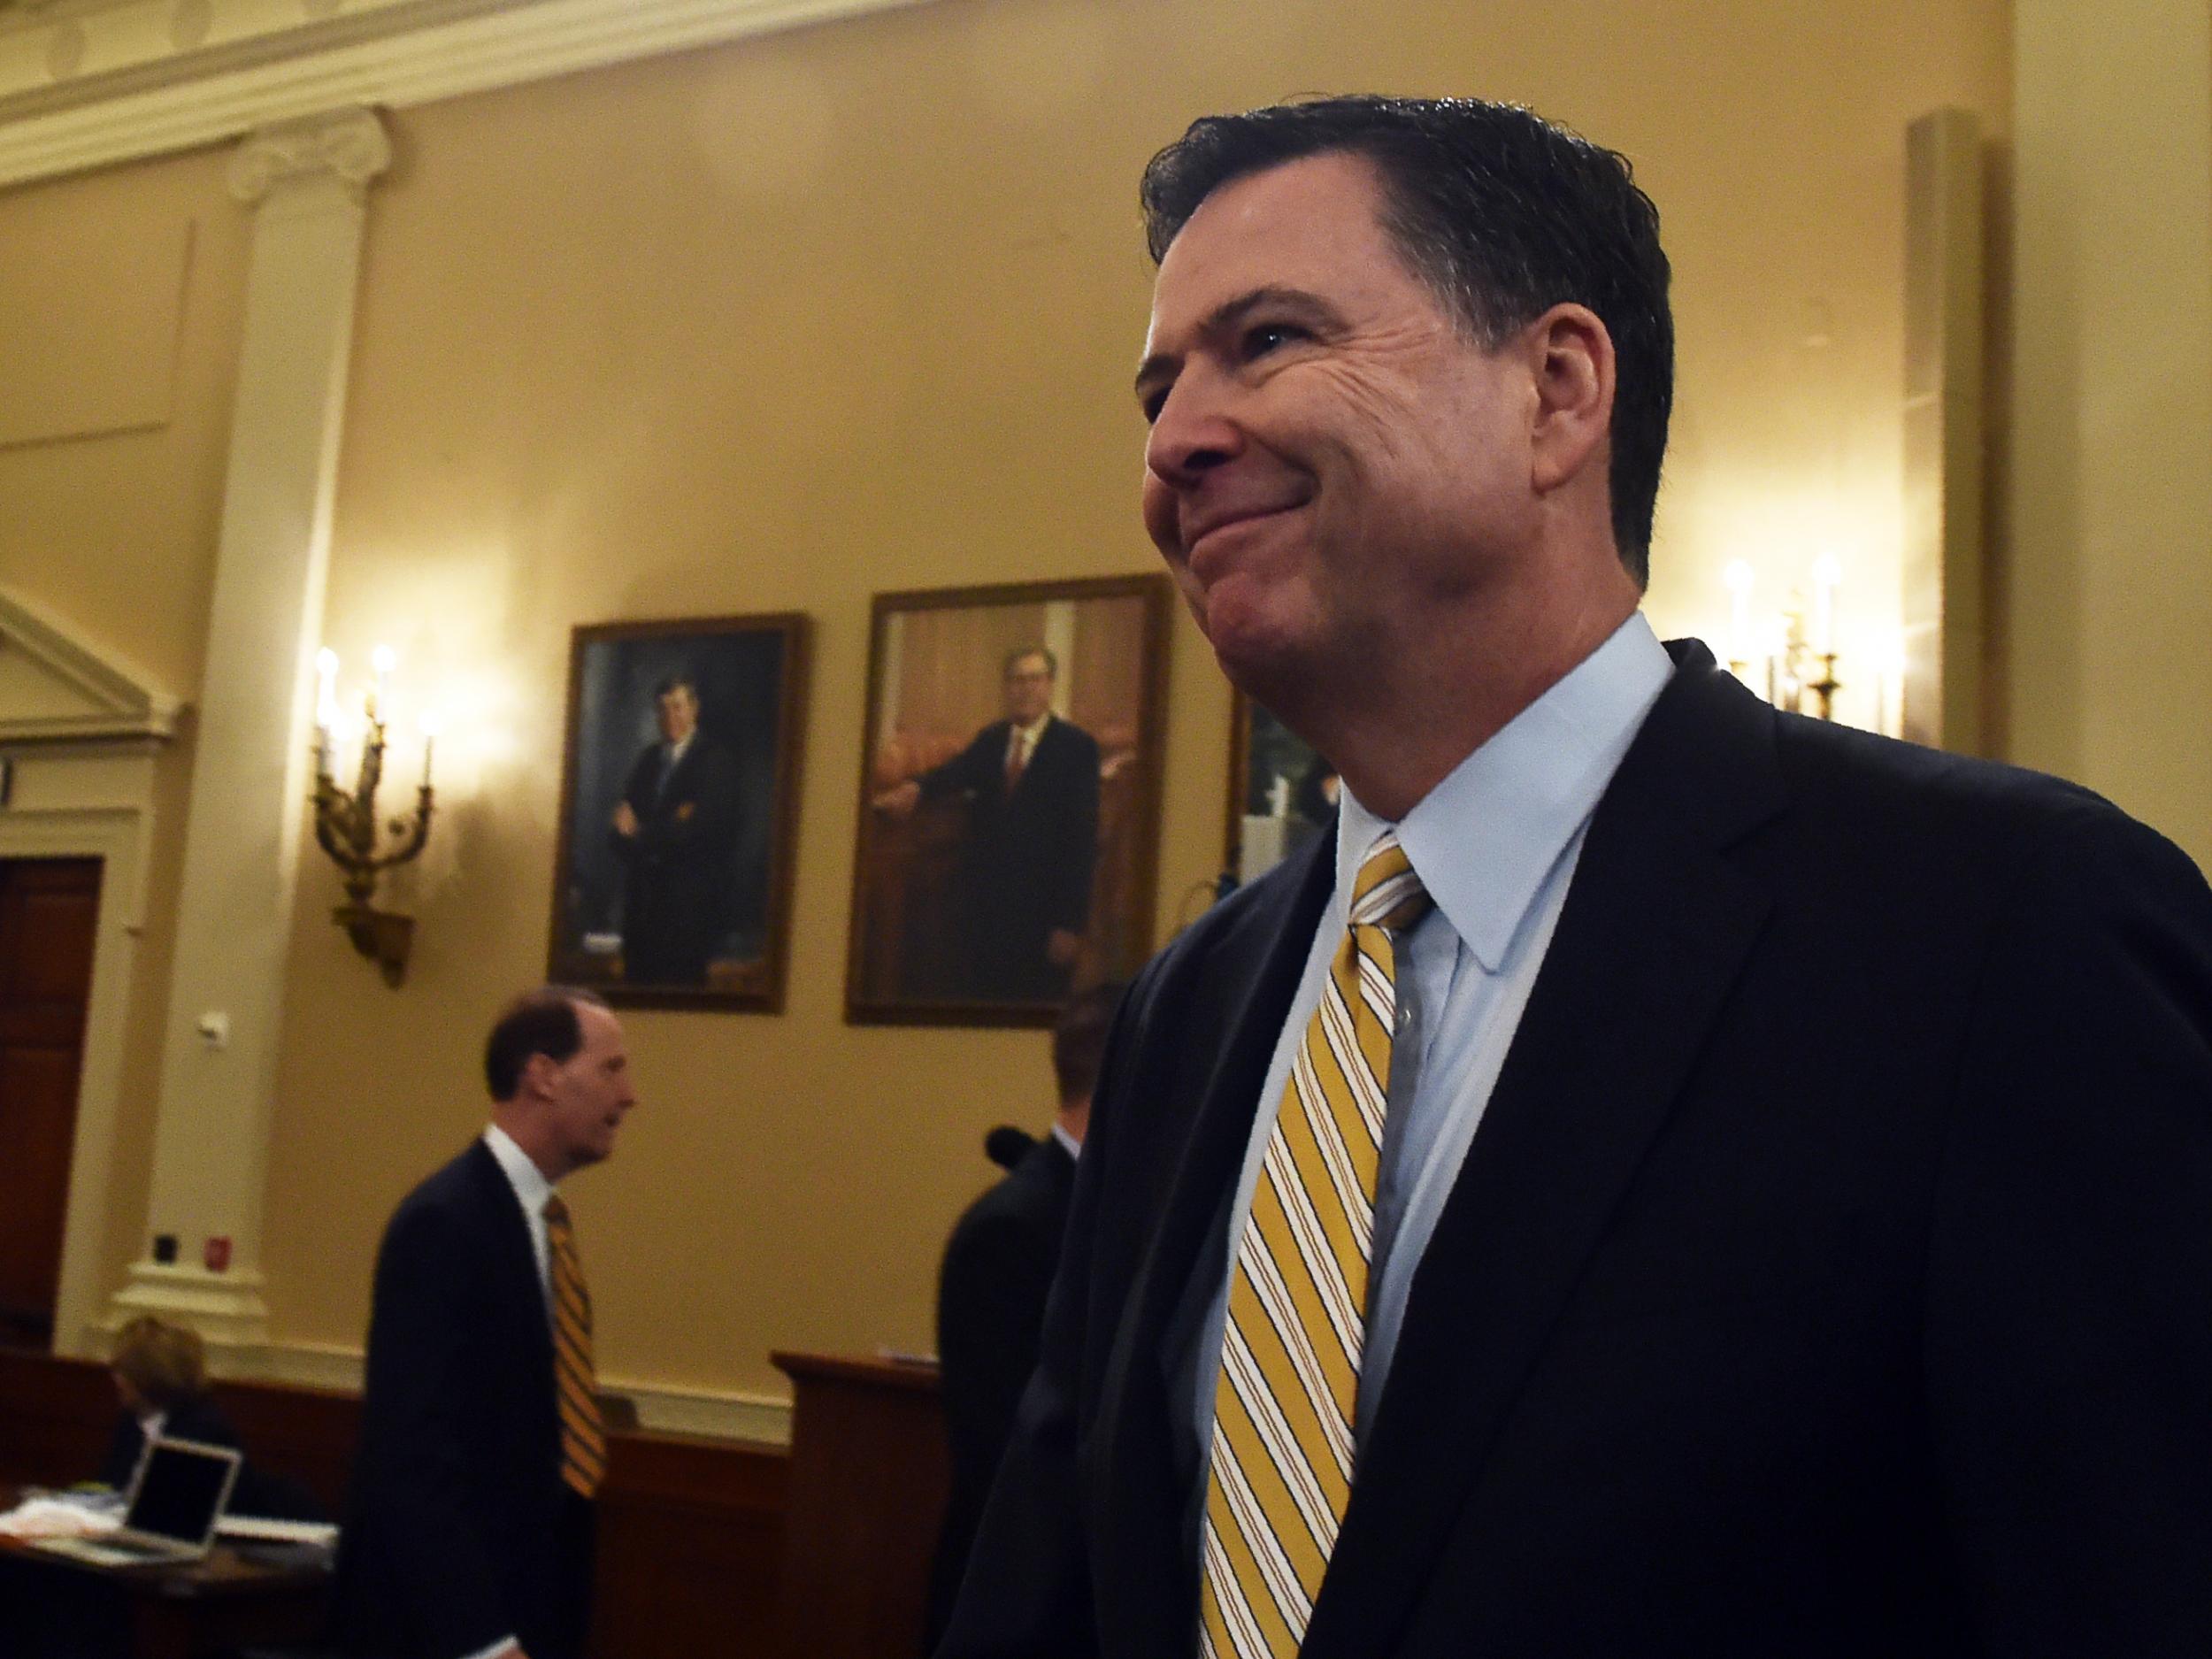 FBI Director James Comey smiles after a break in the House Permanent Select Committee on Intelligence hearing on Russian actions in the 2016 election campaign